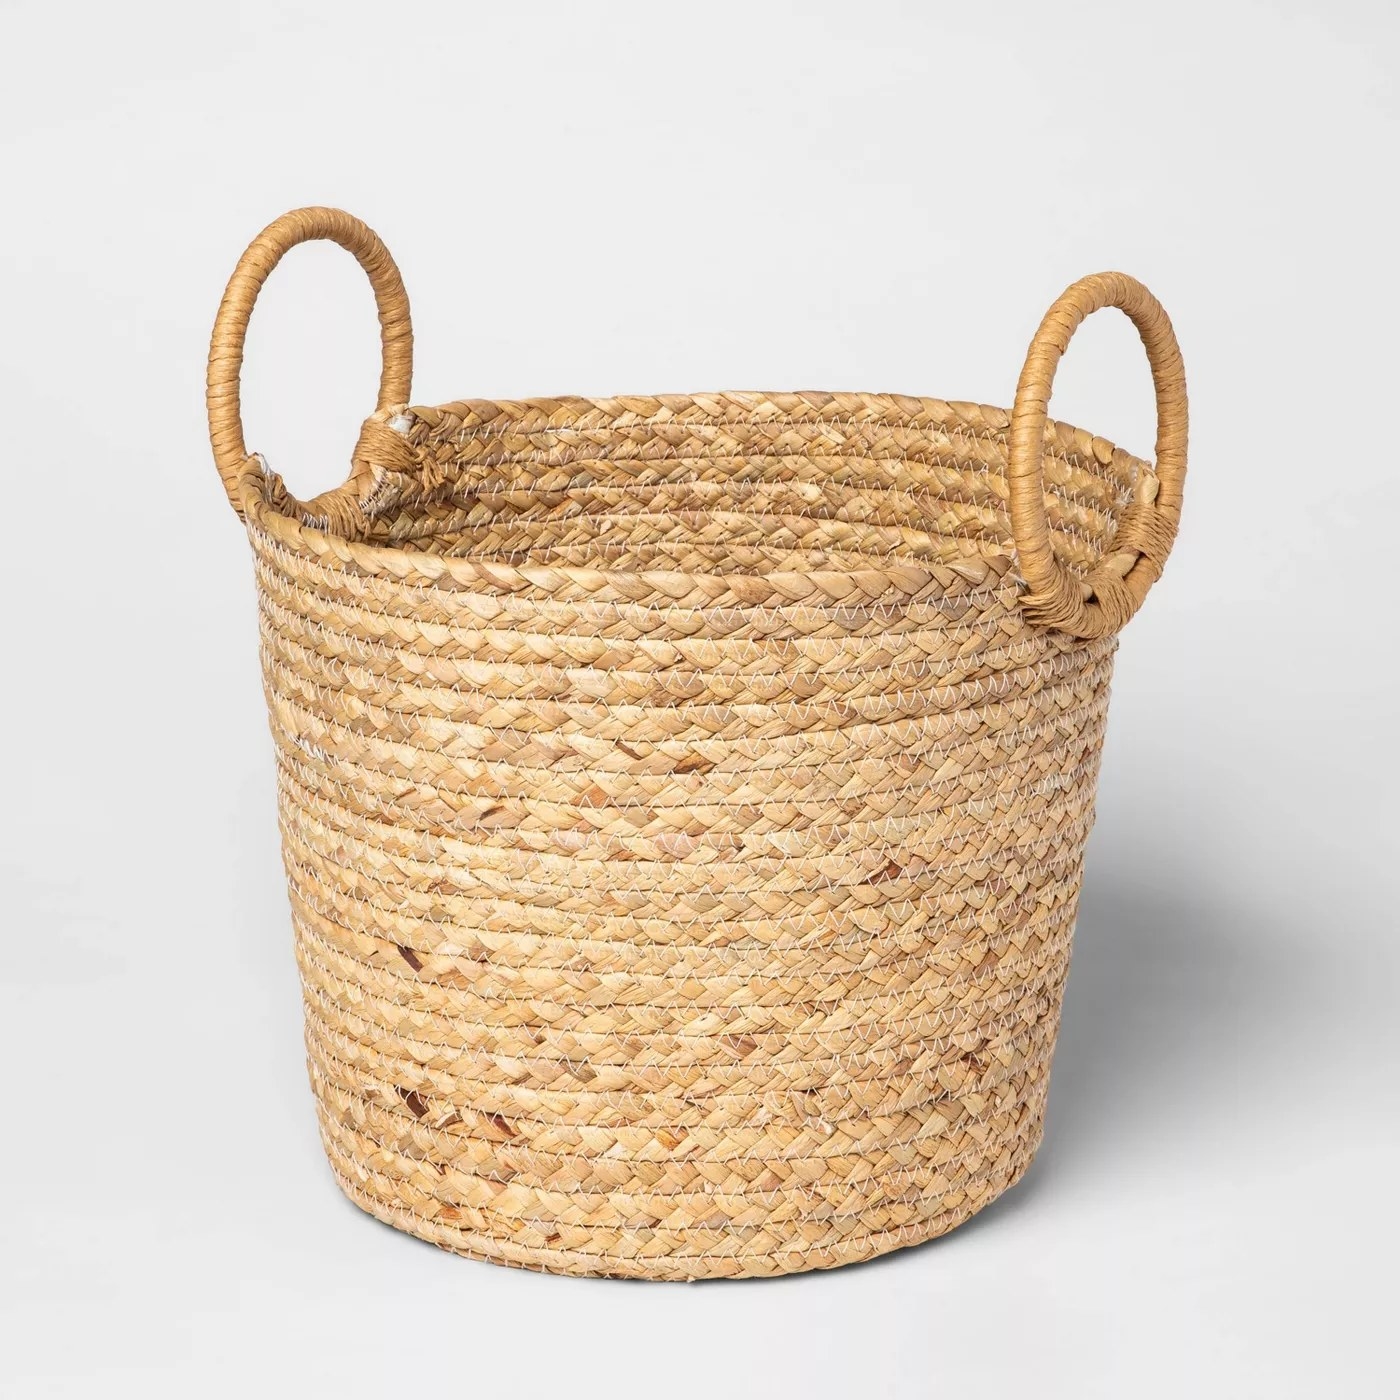 A close-up of the empty basket